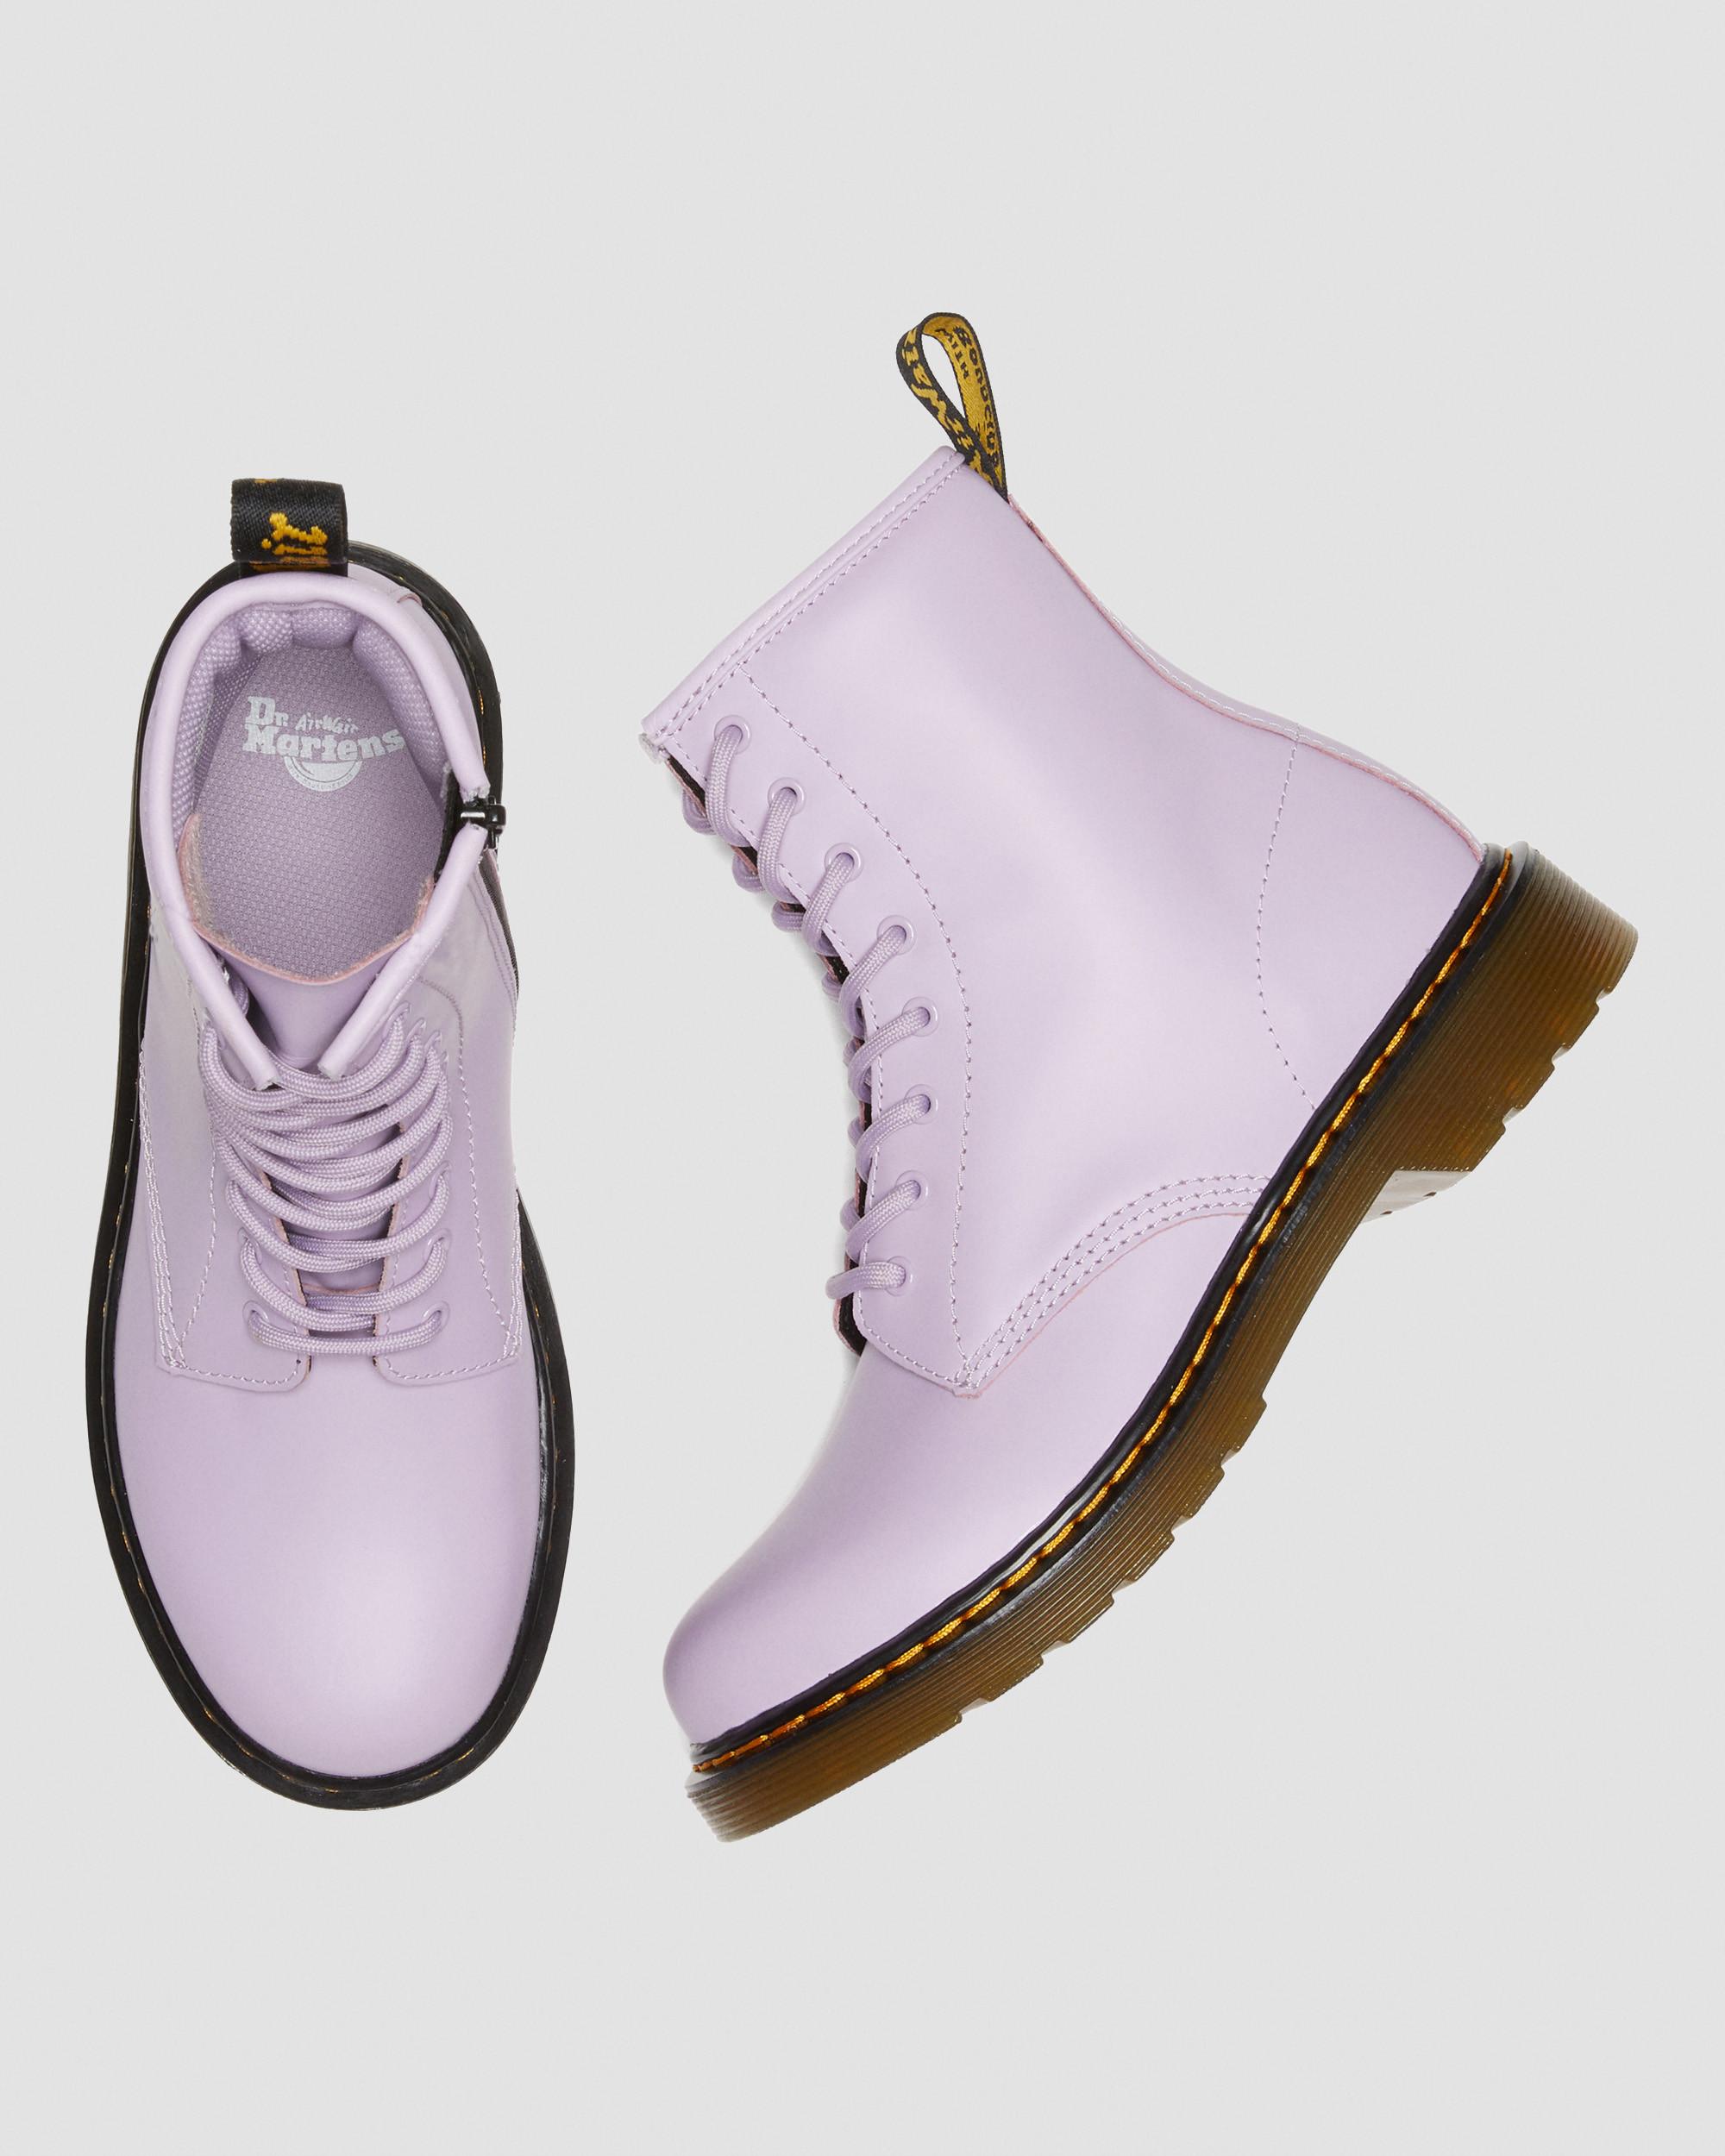 in Leather Lace Romario Boots | Dr. Martens Lilac Up 1460 Youth